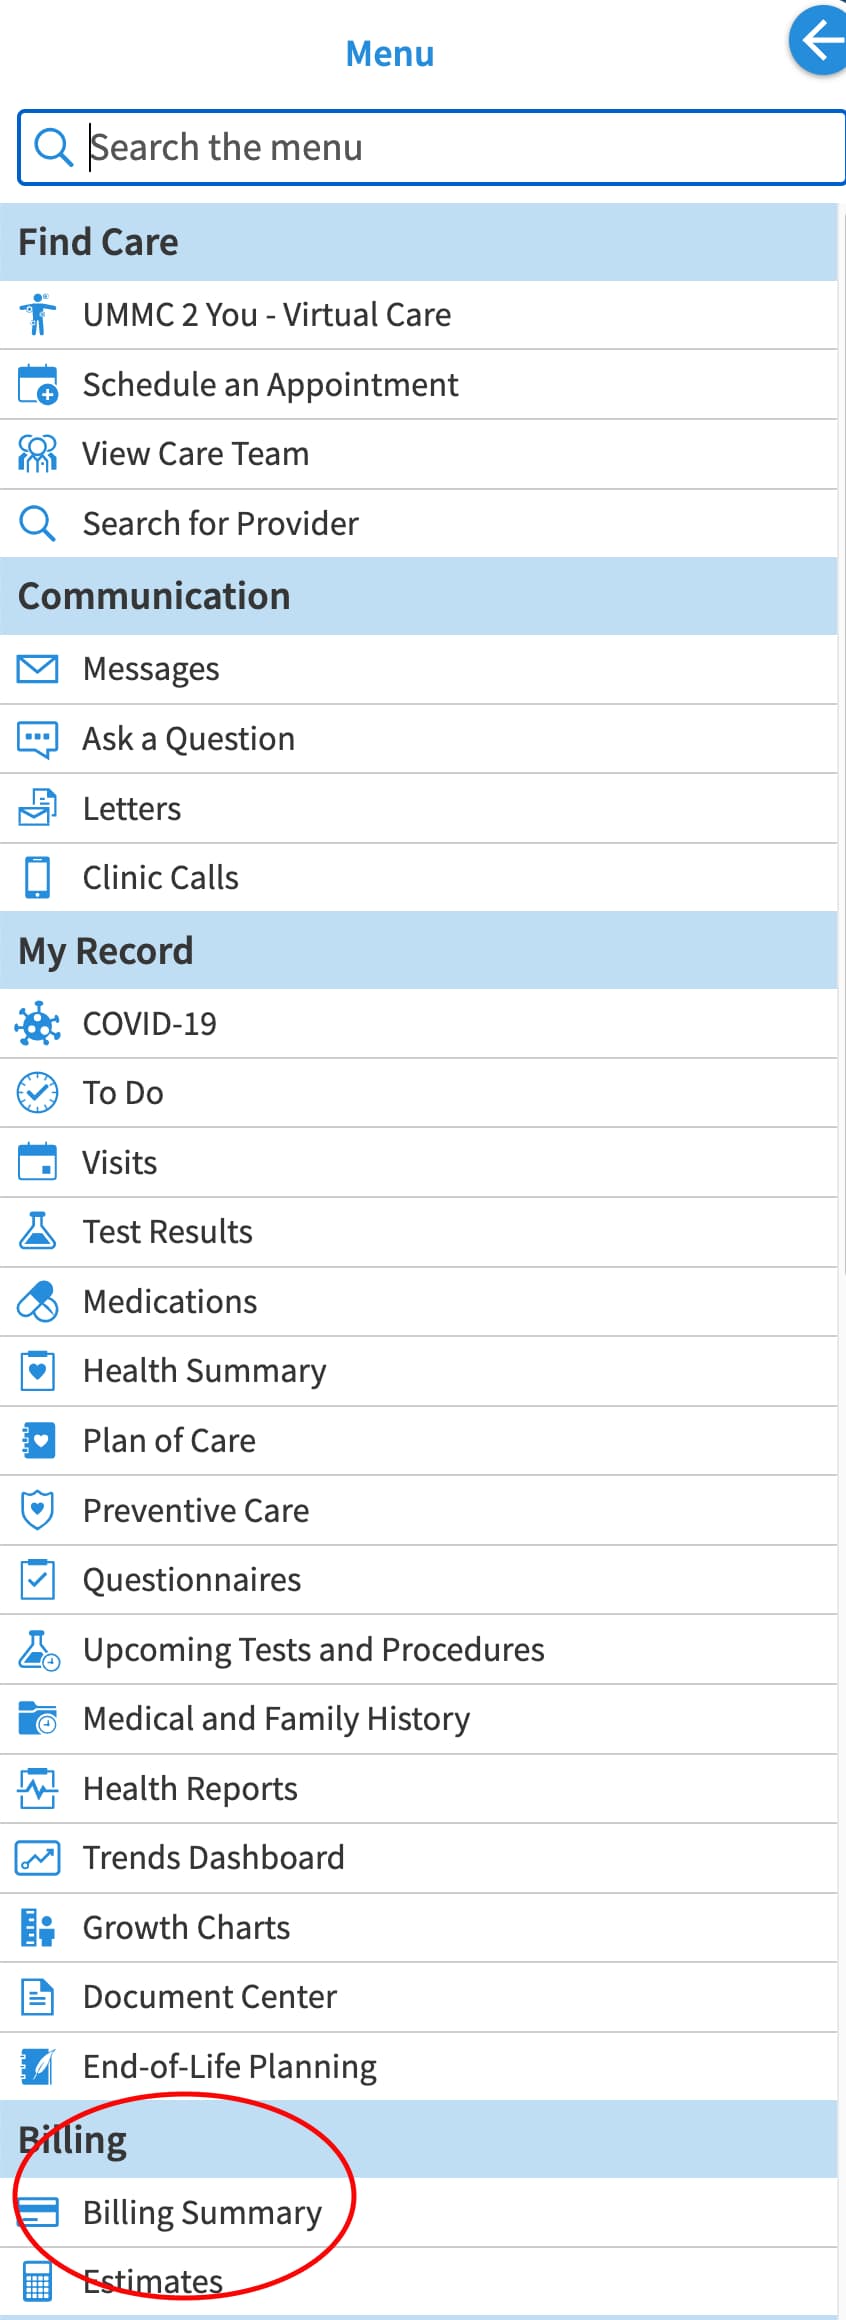 A screenshot of the expanded MyChart menu shows multiple options including Billing Summary and Estimates at the bottom.